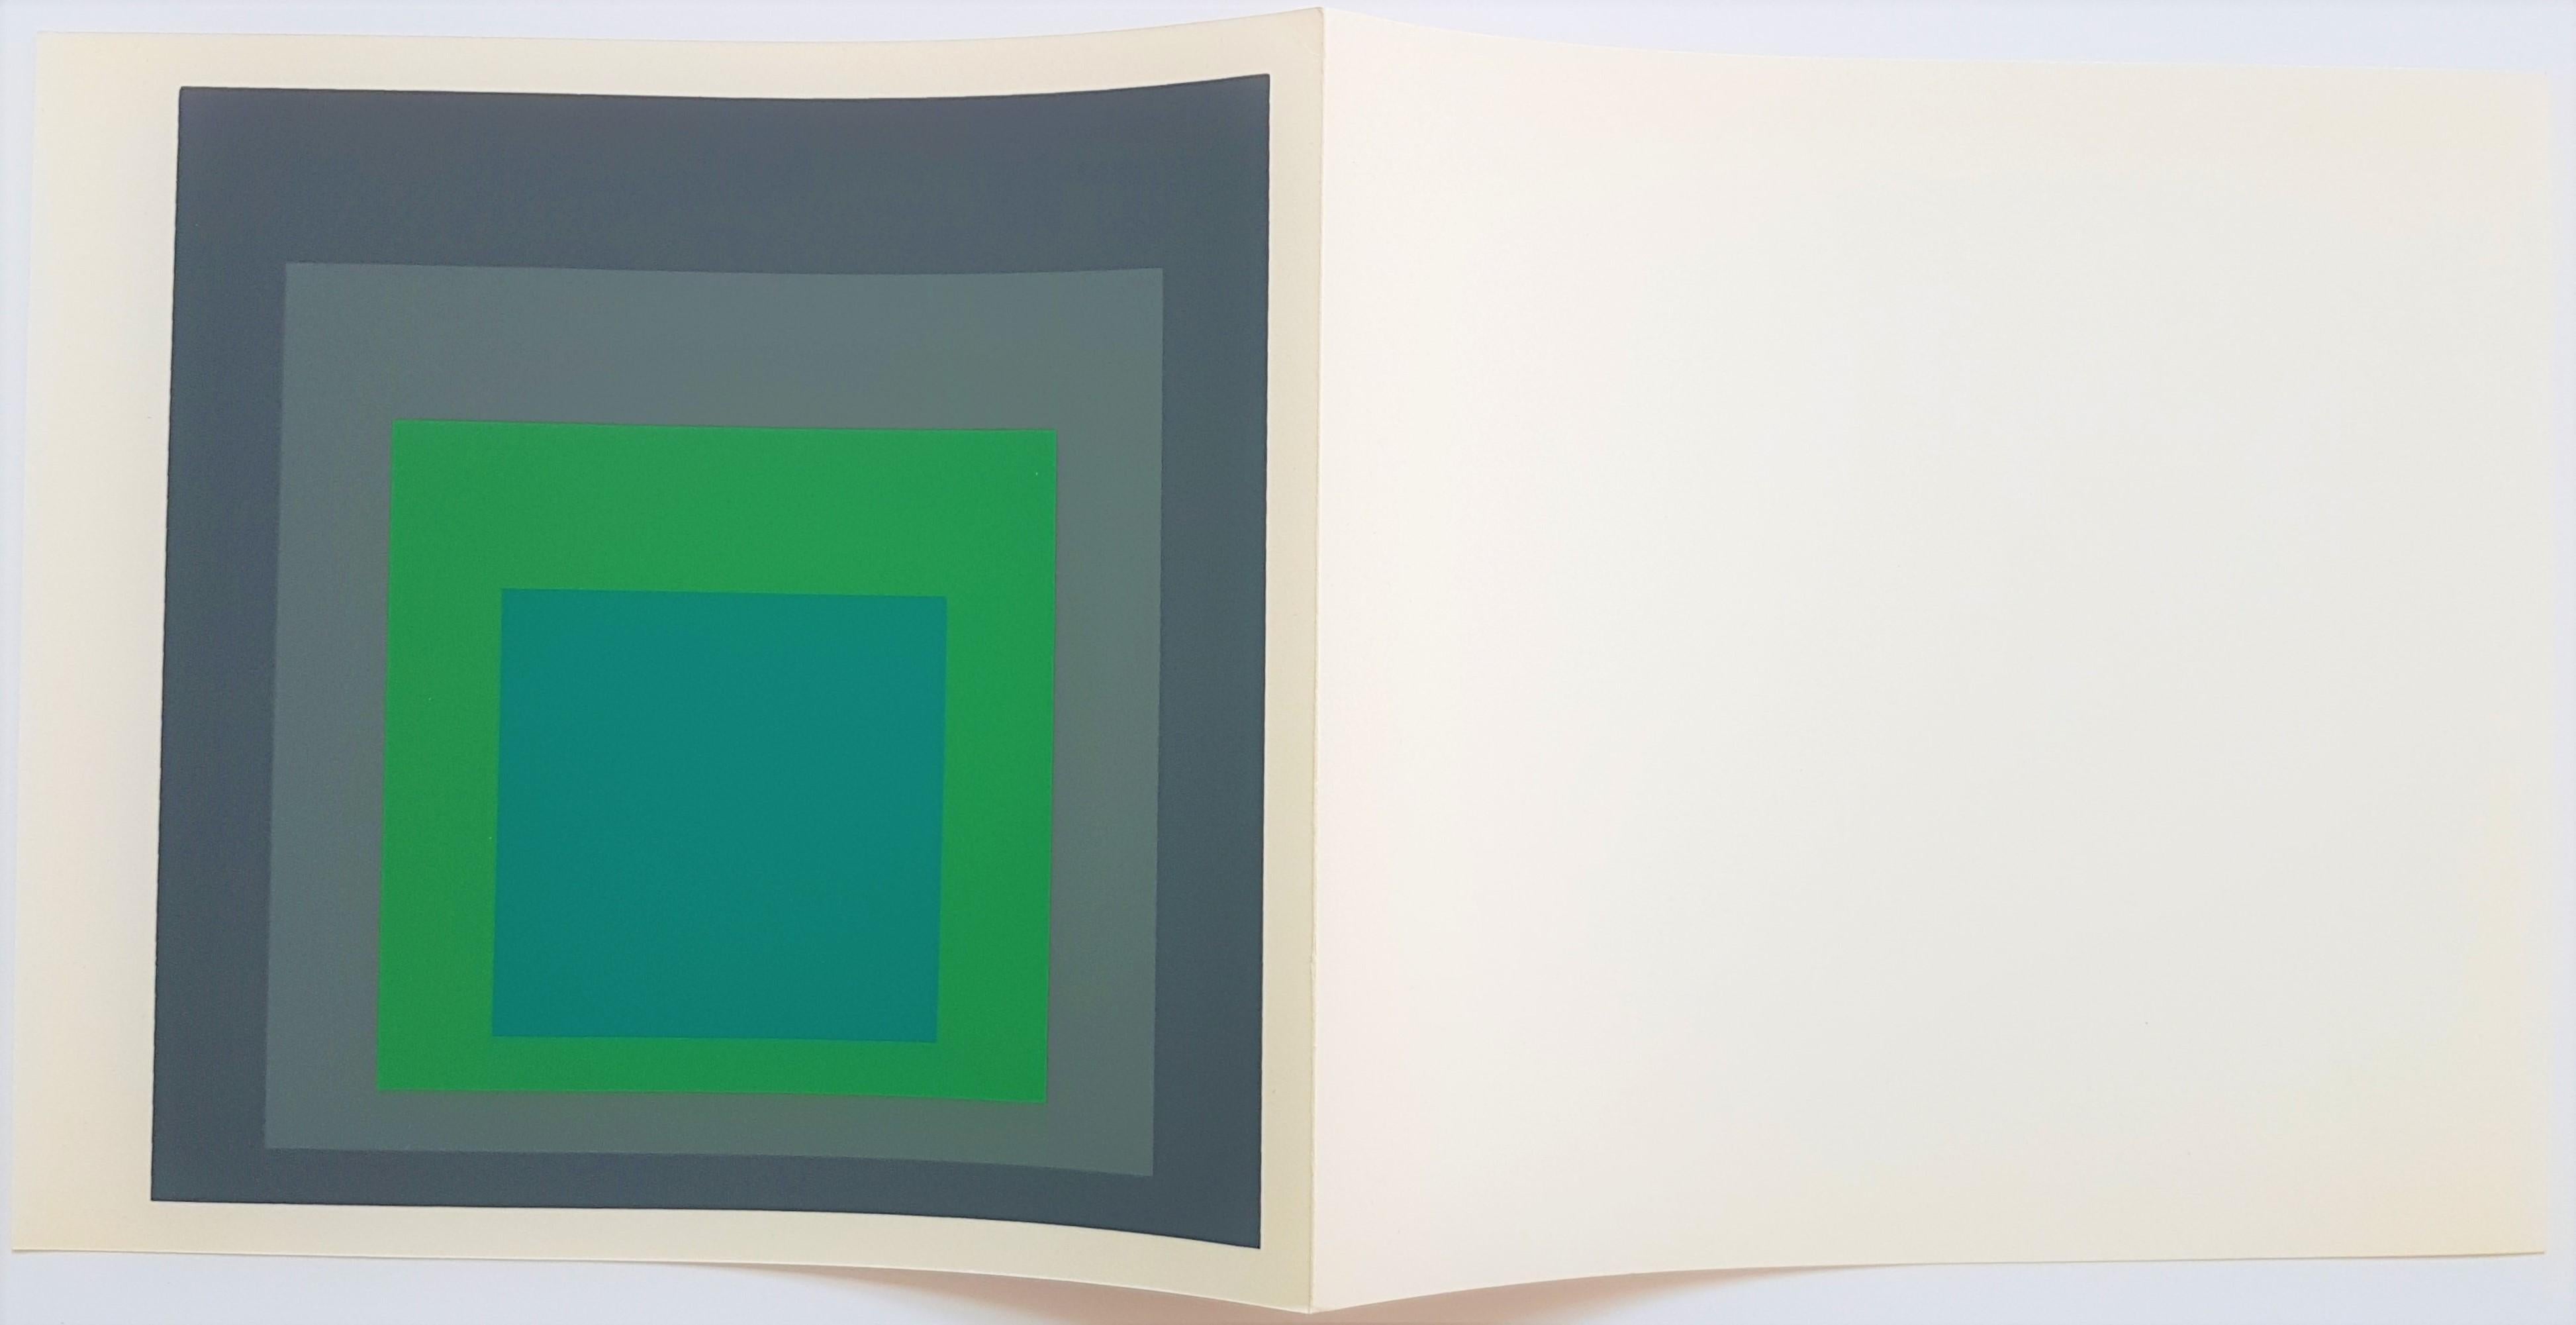 Homage to the Square: Renewed Hope (~35% OFF LIST PRICE - LIMITED TIME ONLY) - Print by (after) Josef Albers